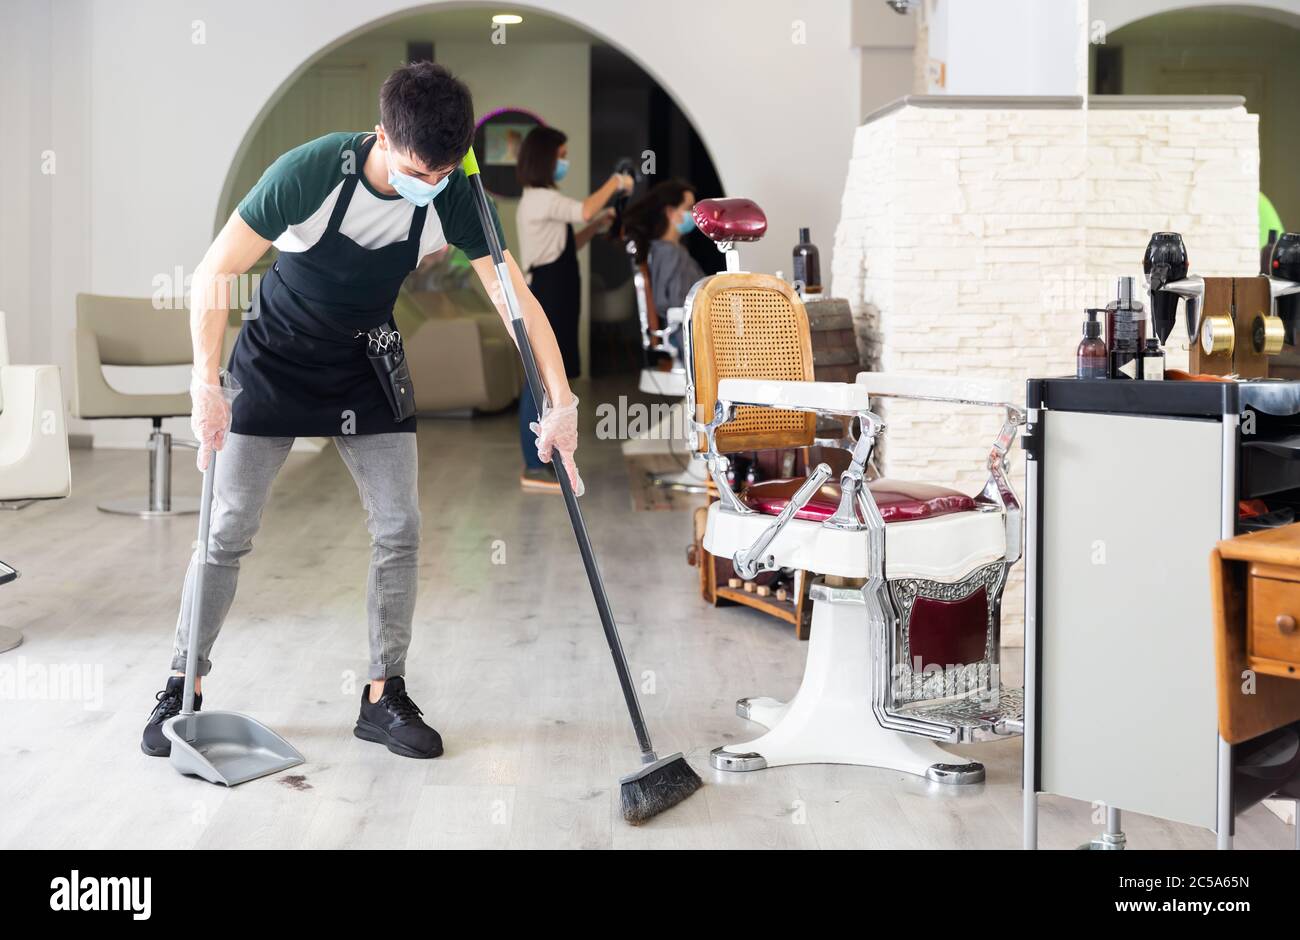 Working process in beauty salon during pandemic situation, man sweeping floor, female hairstyler making hairdo to client on background, all people wea Stock Photo